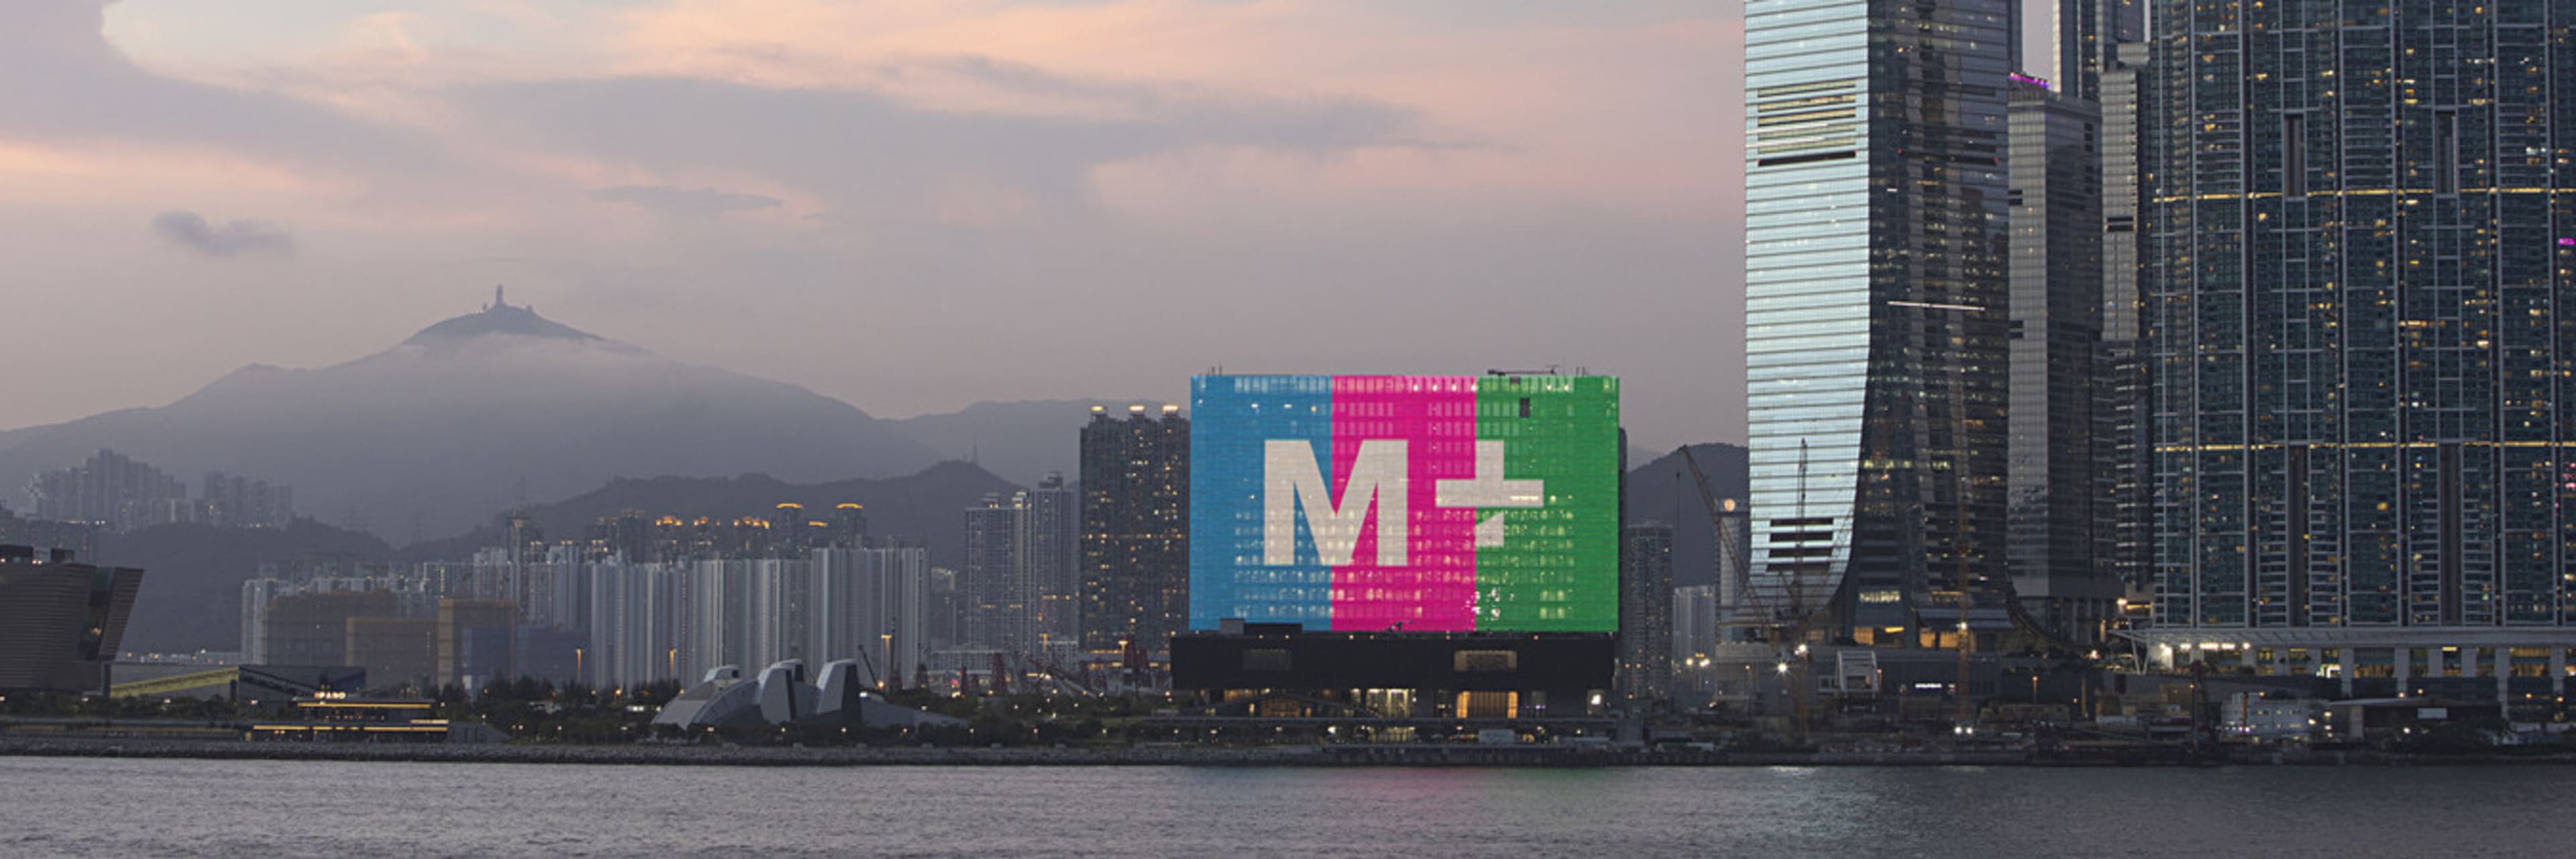 The M+ museum in Kowloon, Hong Kong.